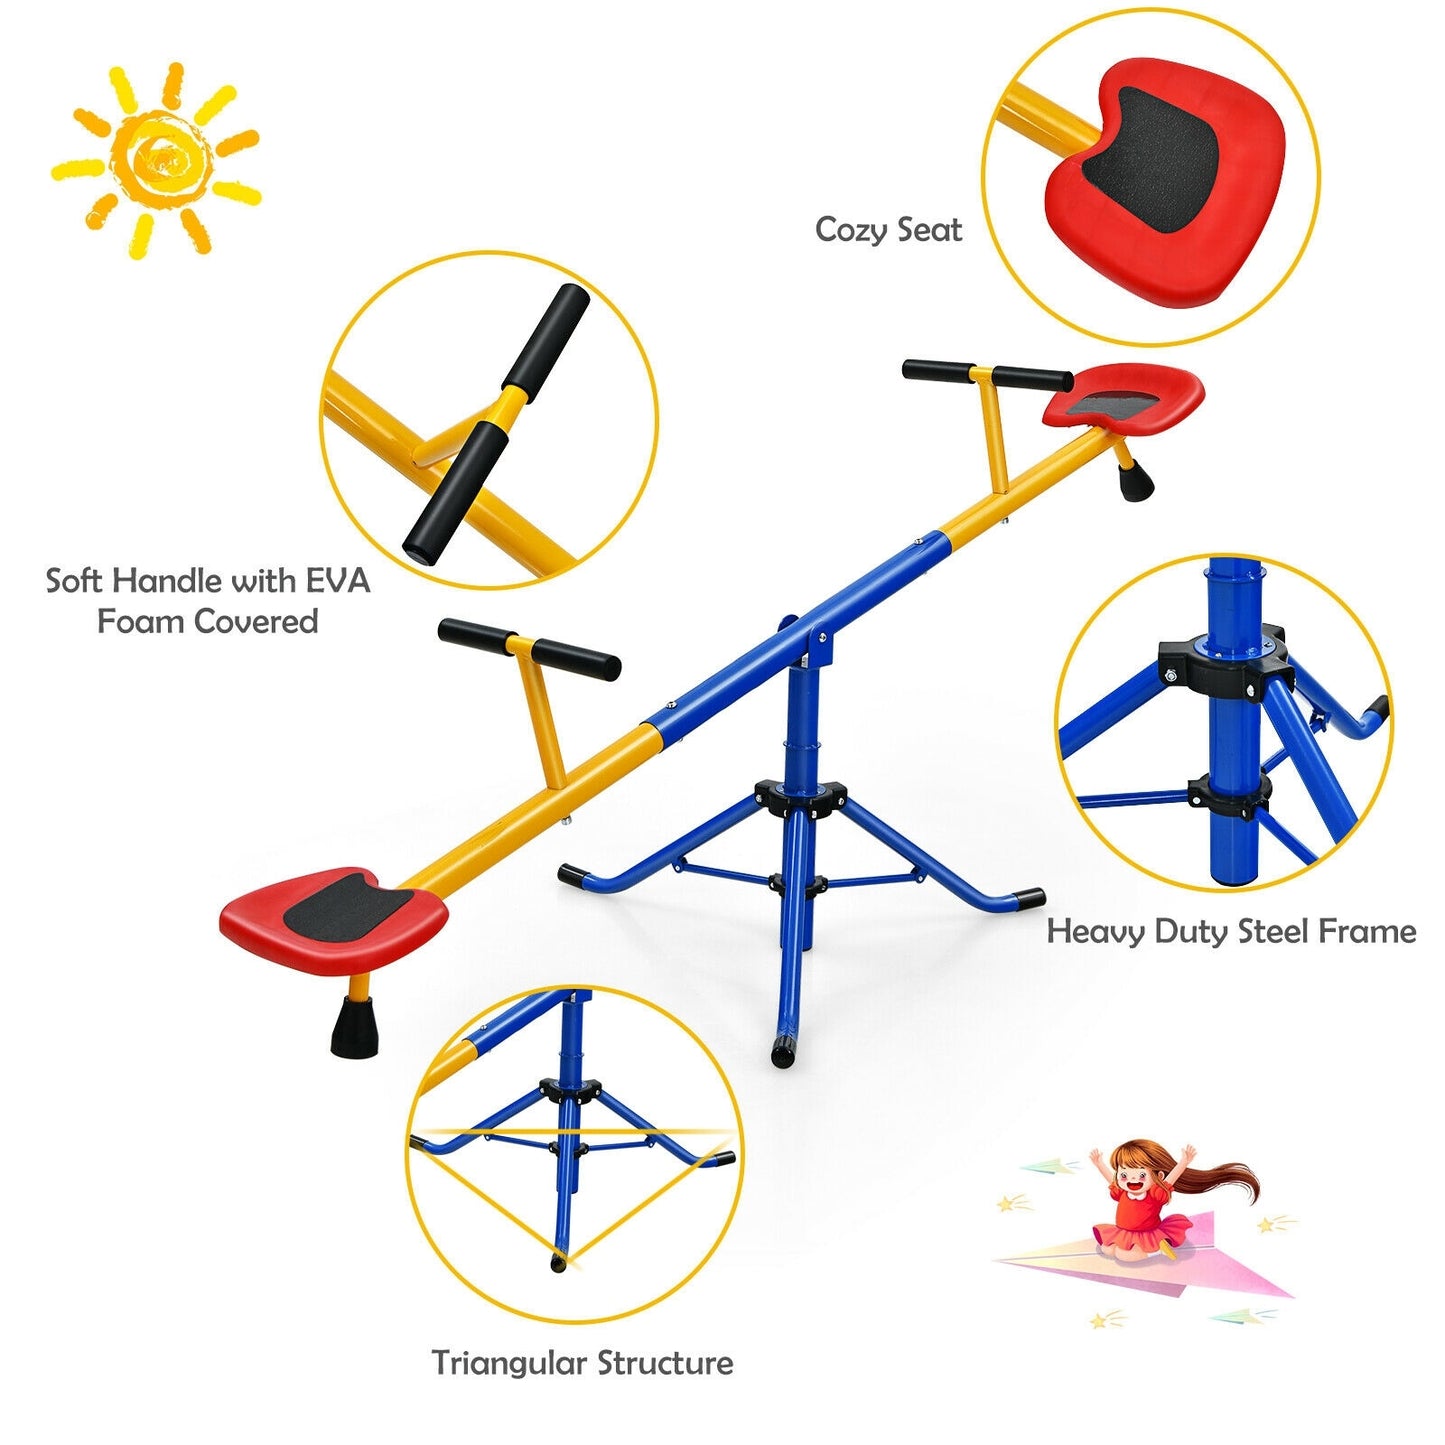 360°Rotation Kids Seesaw Swivel Teeter Totter Playground Equipment - Gallery Canada